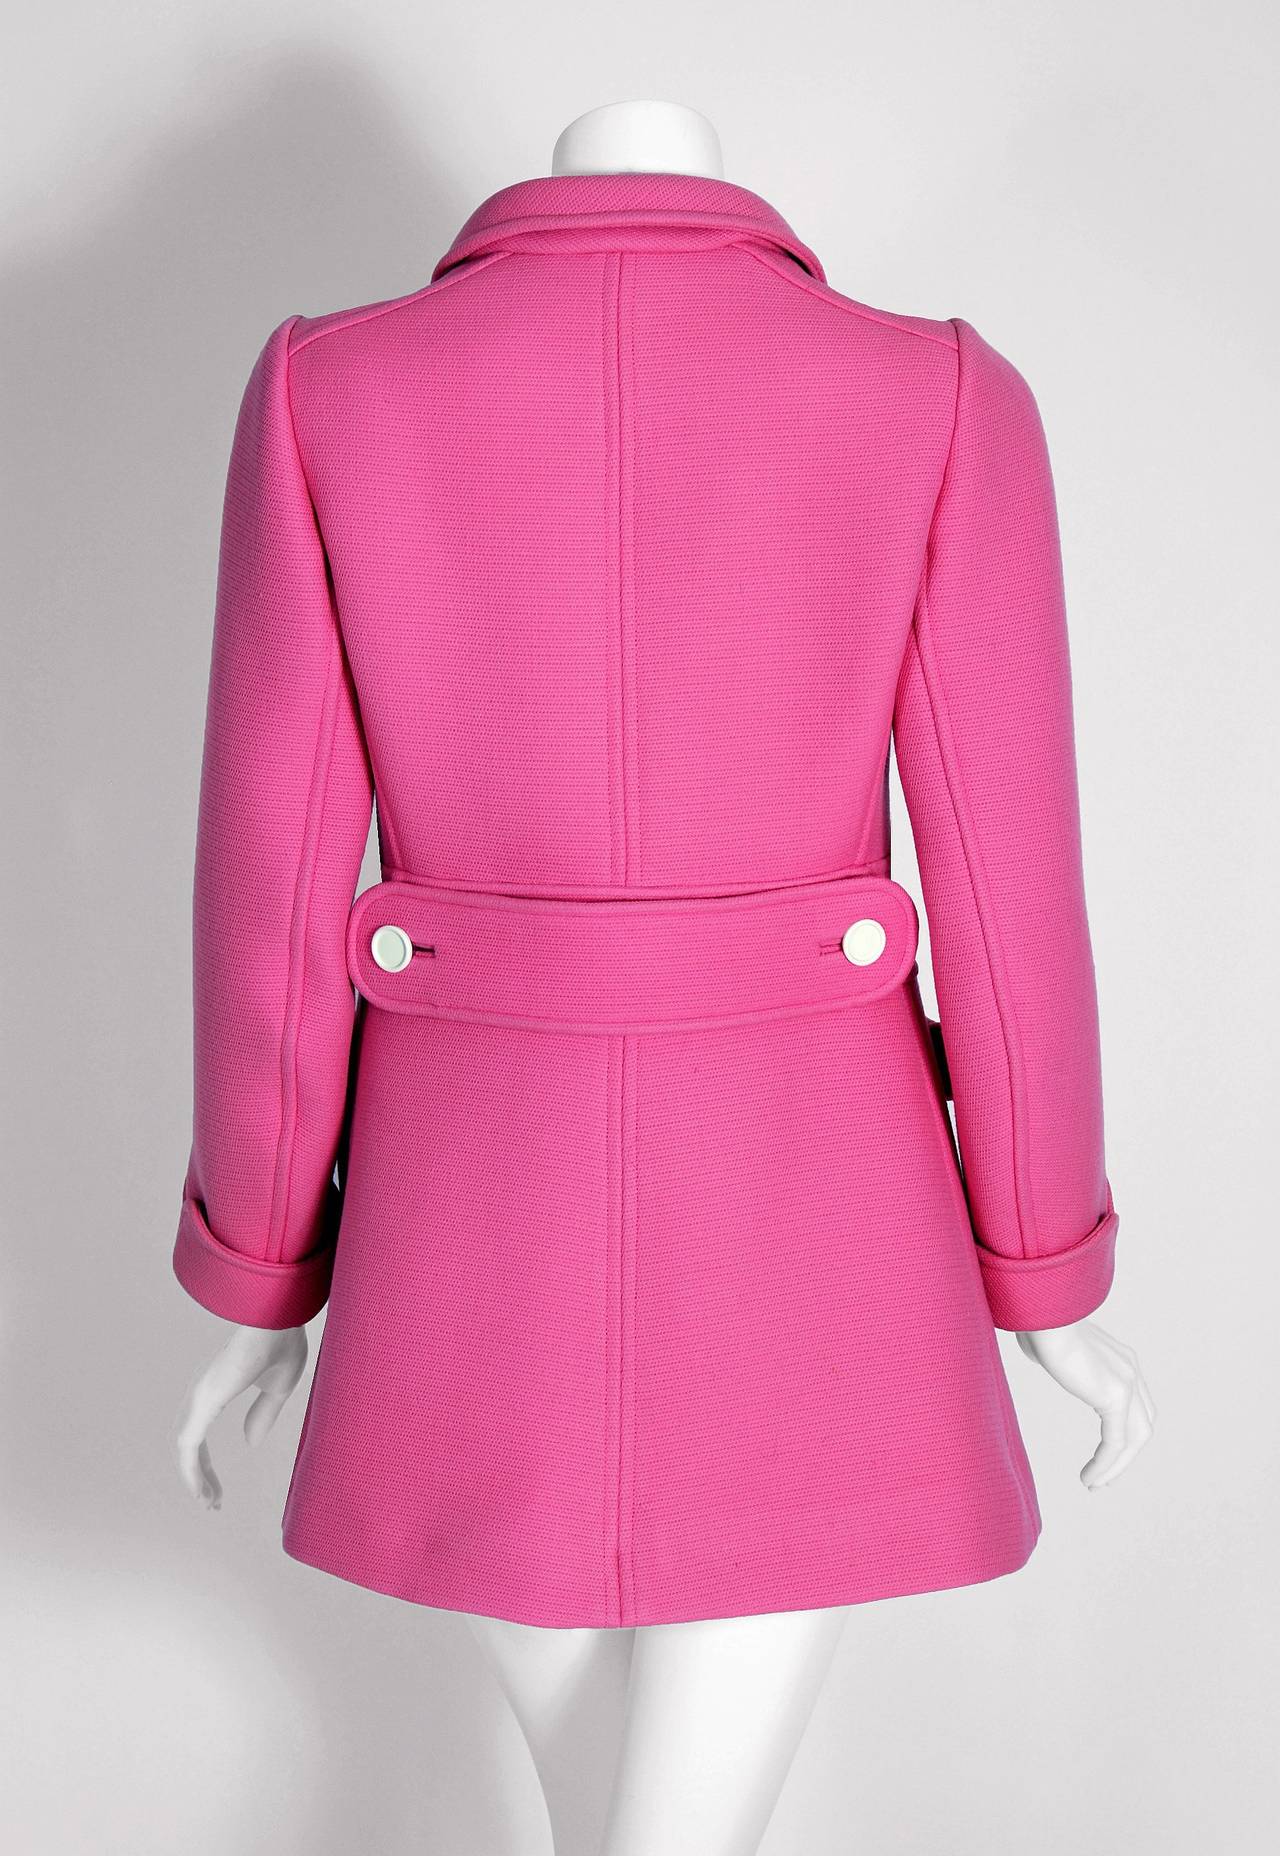 1967 Courreges Couture Bubblegum-Pink Wool Mod Space-Age Tailored Coat Jacket 1